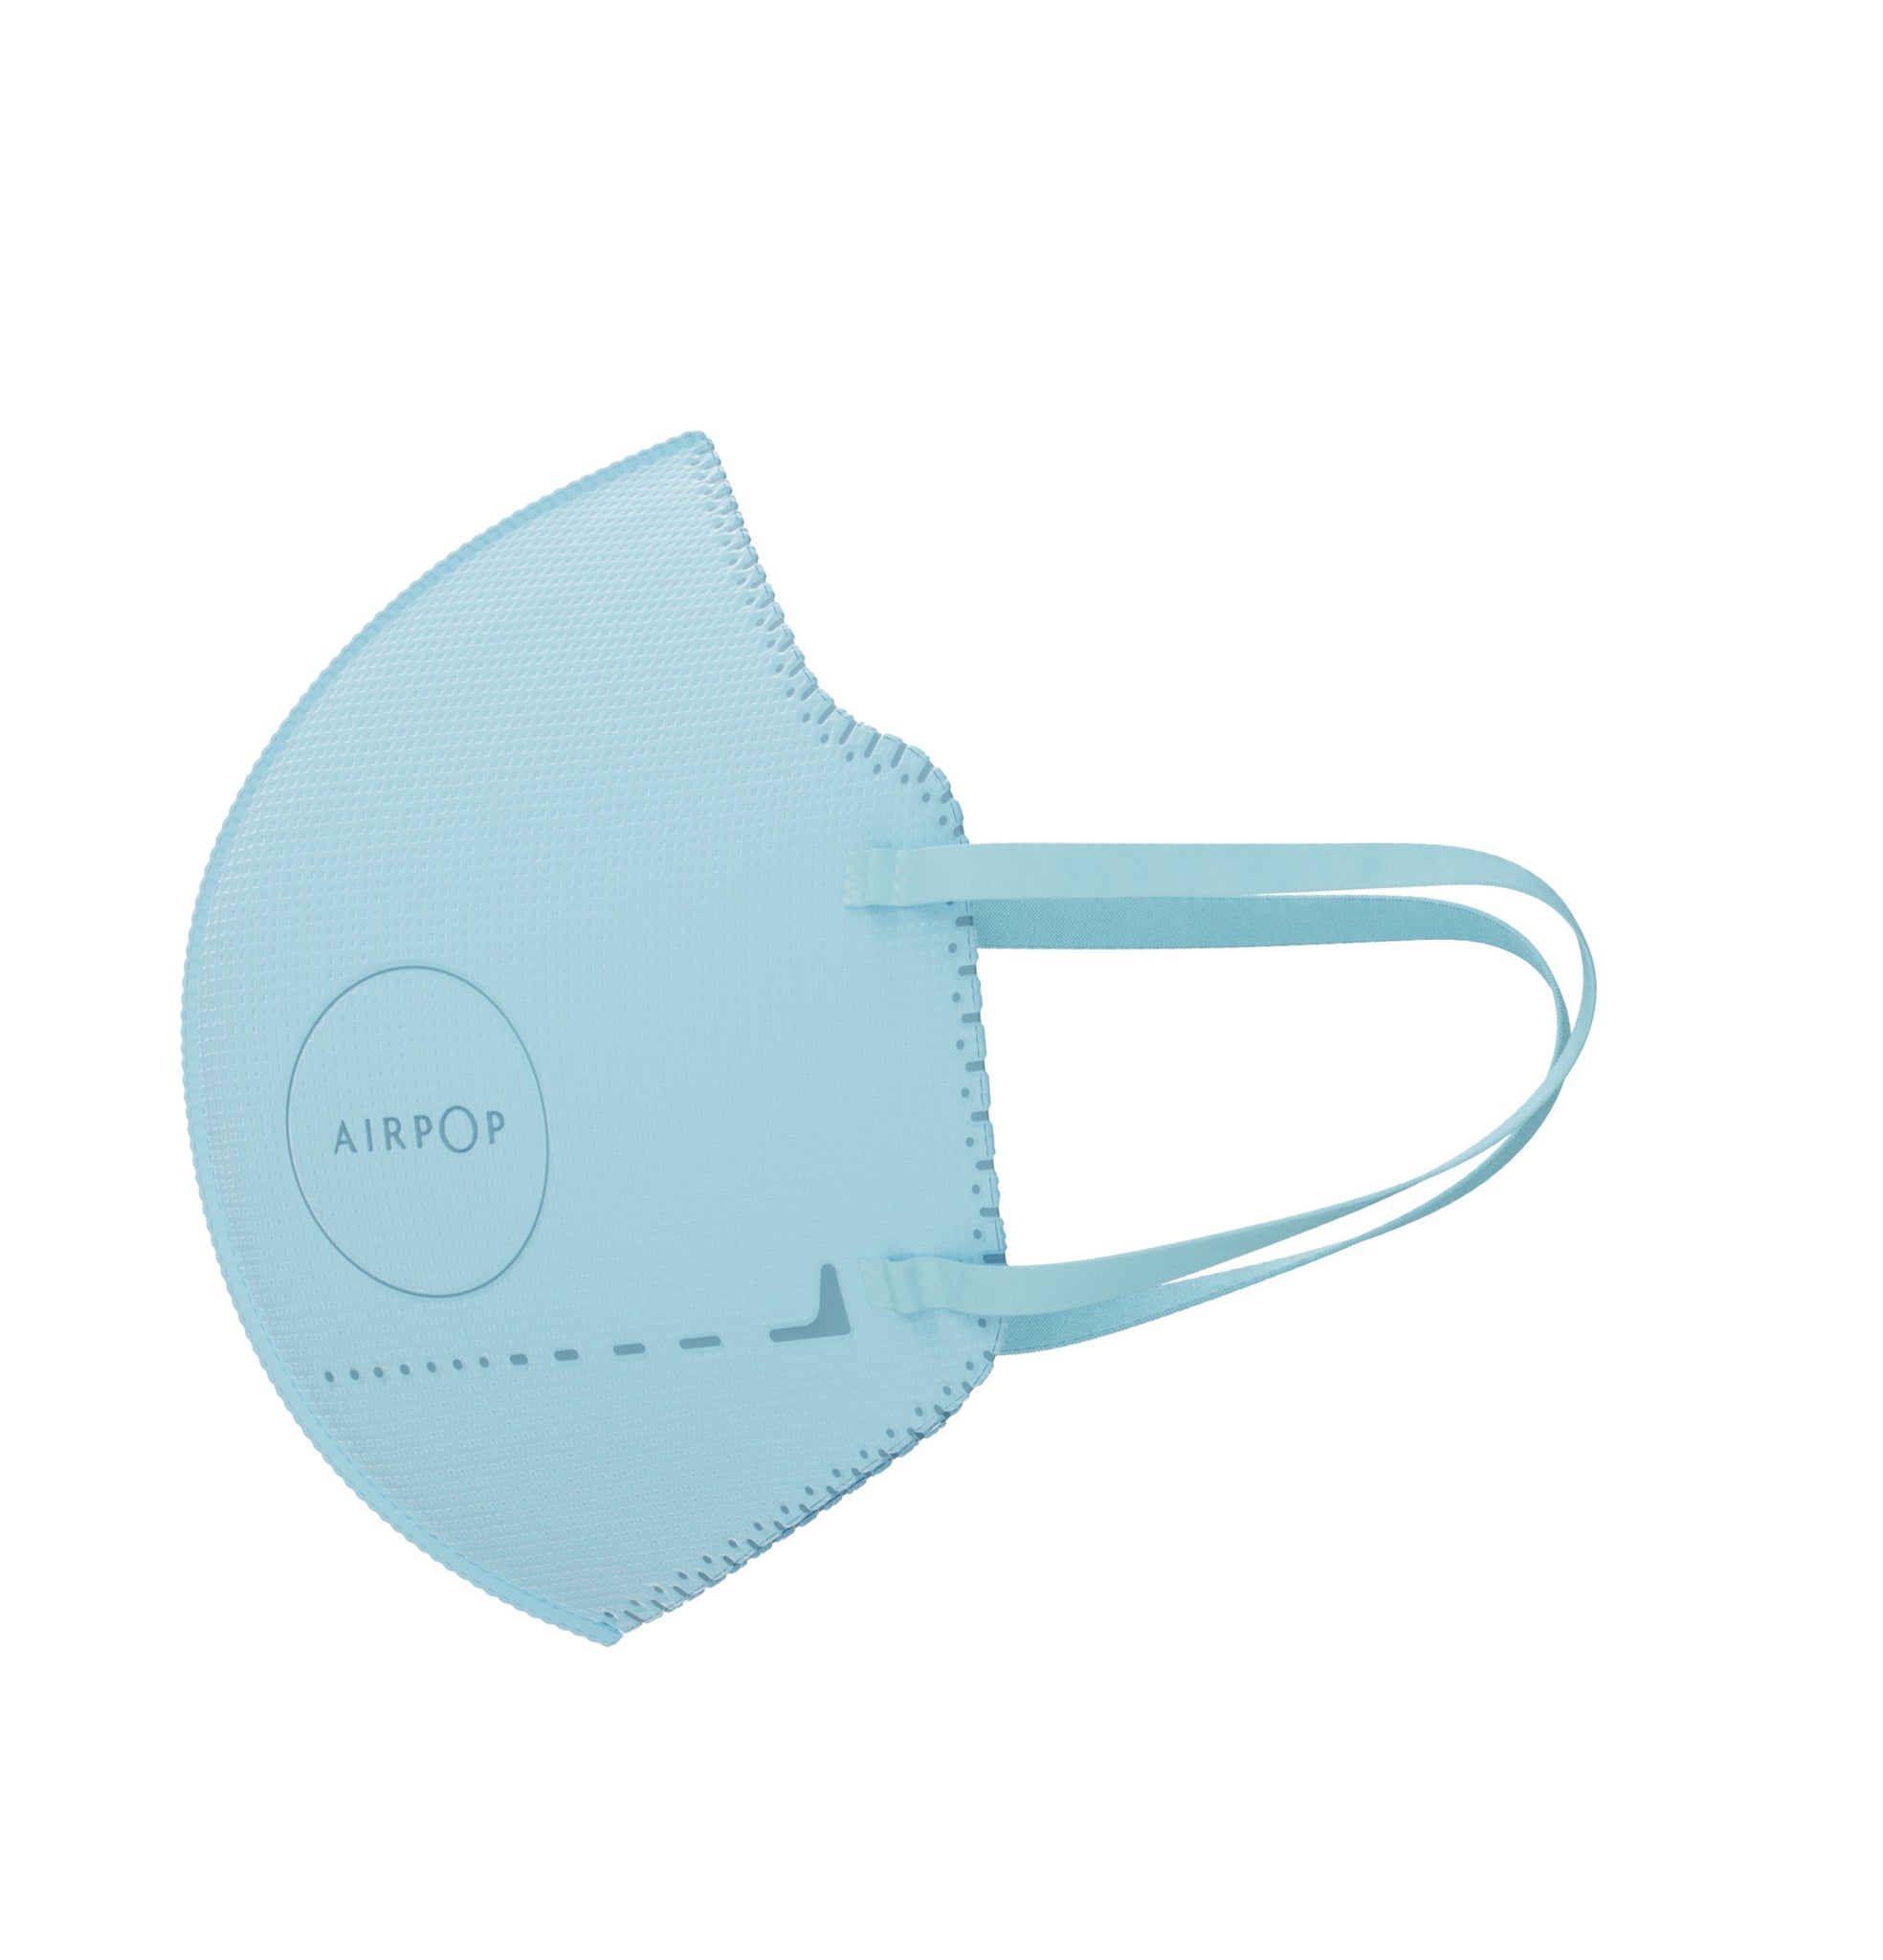 An AirPop Kids Mask on a white background, providing breathability and comfort.